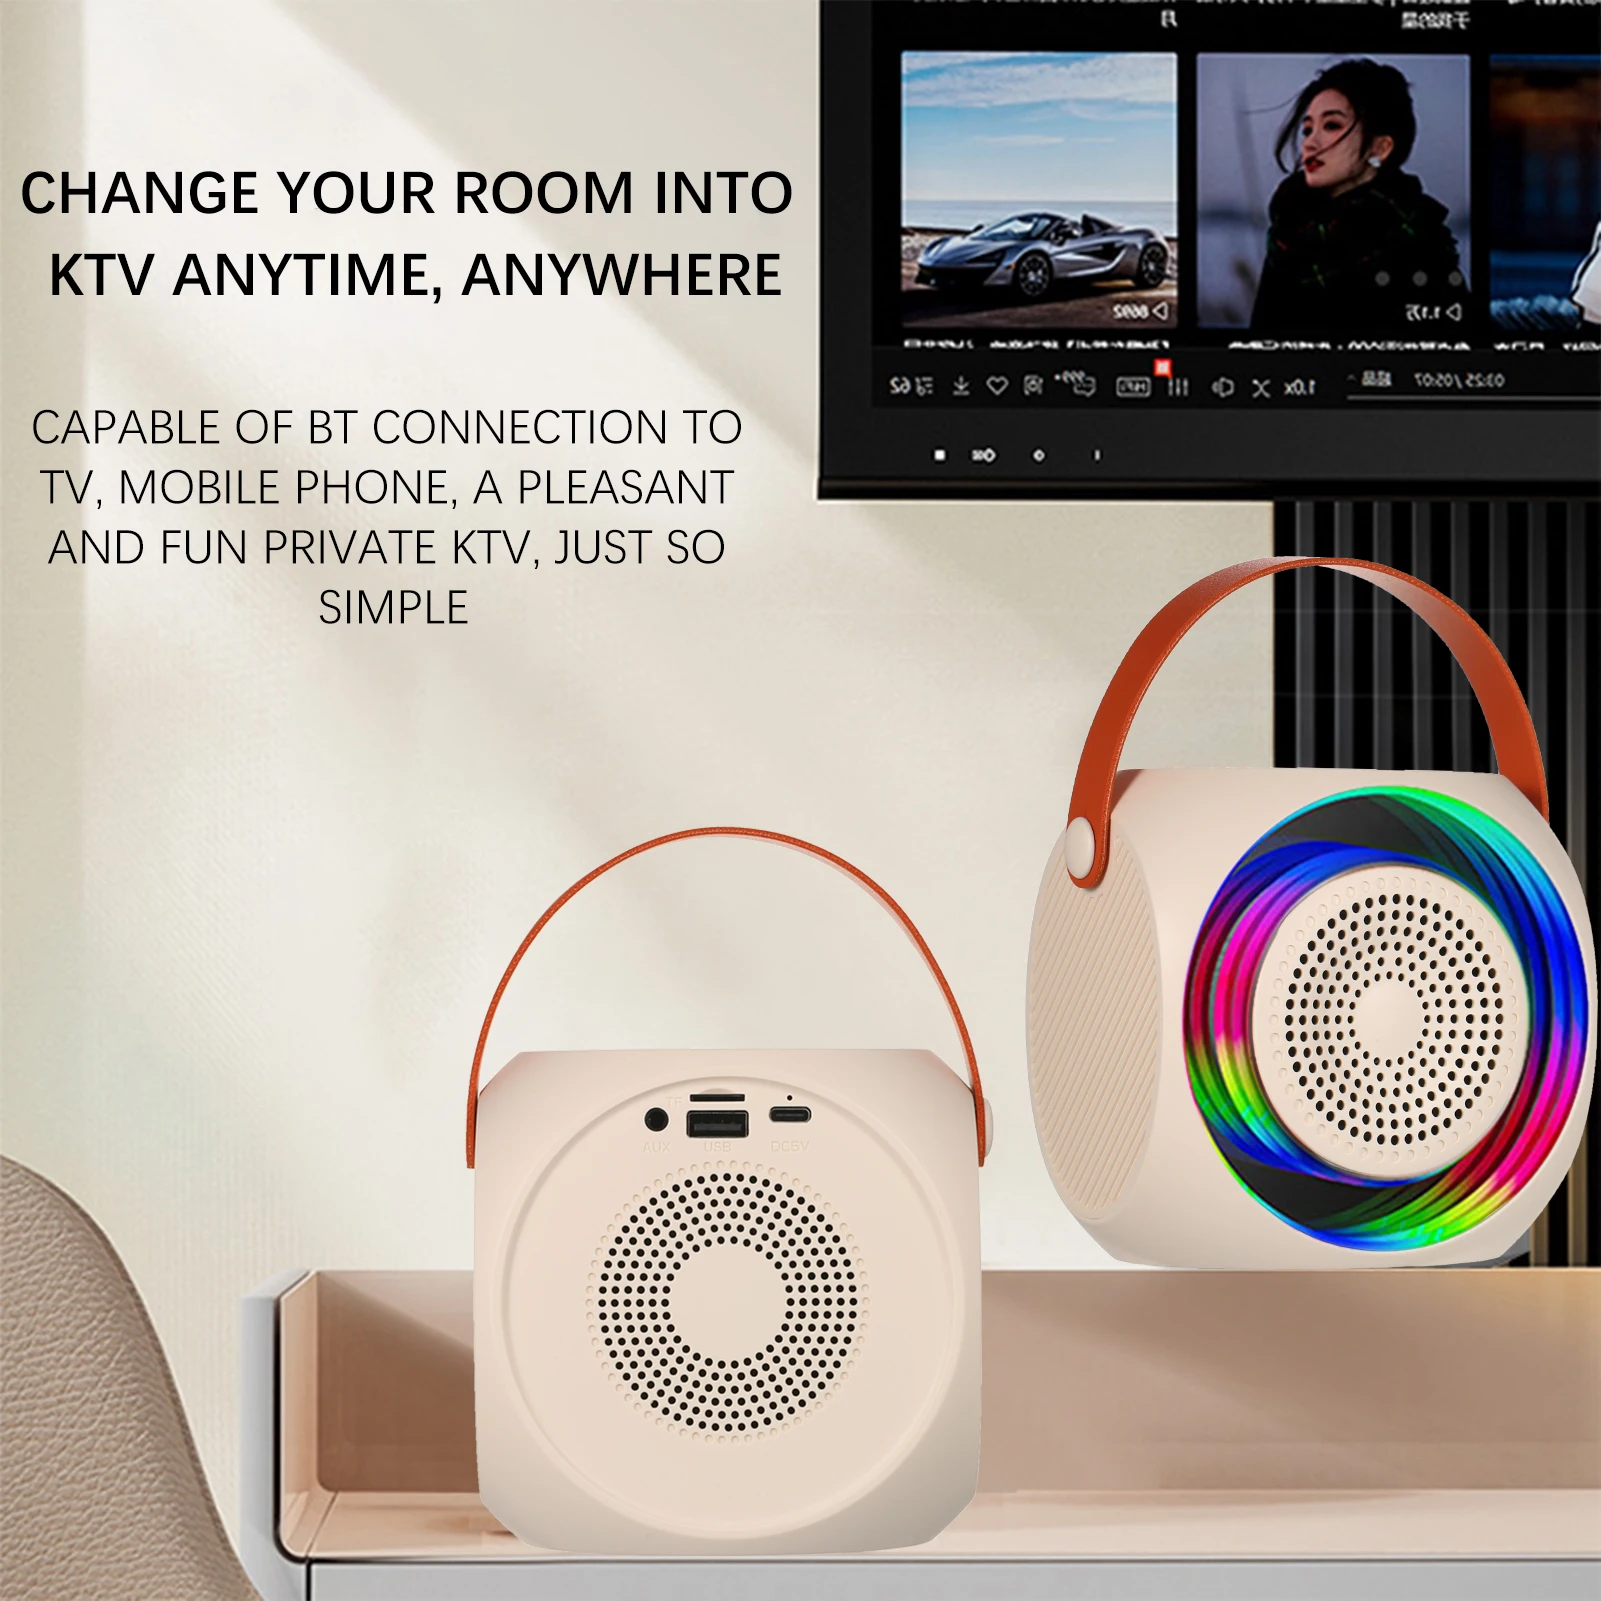 

Mini Portable Microphone & Sound Box Set Home KTV BT Speaker with 2 Microphones Home Outdoor BT5.0 Connection for Home